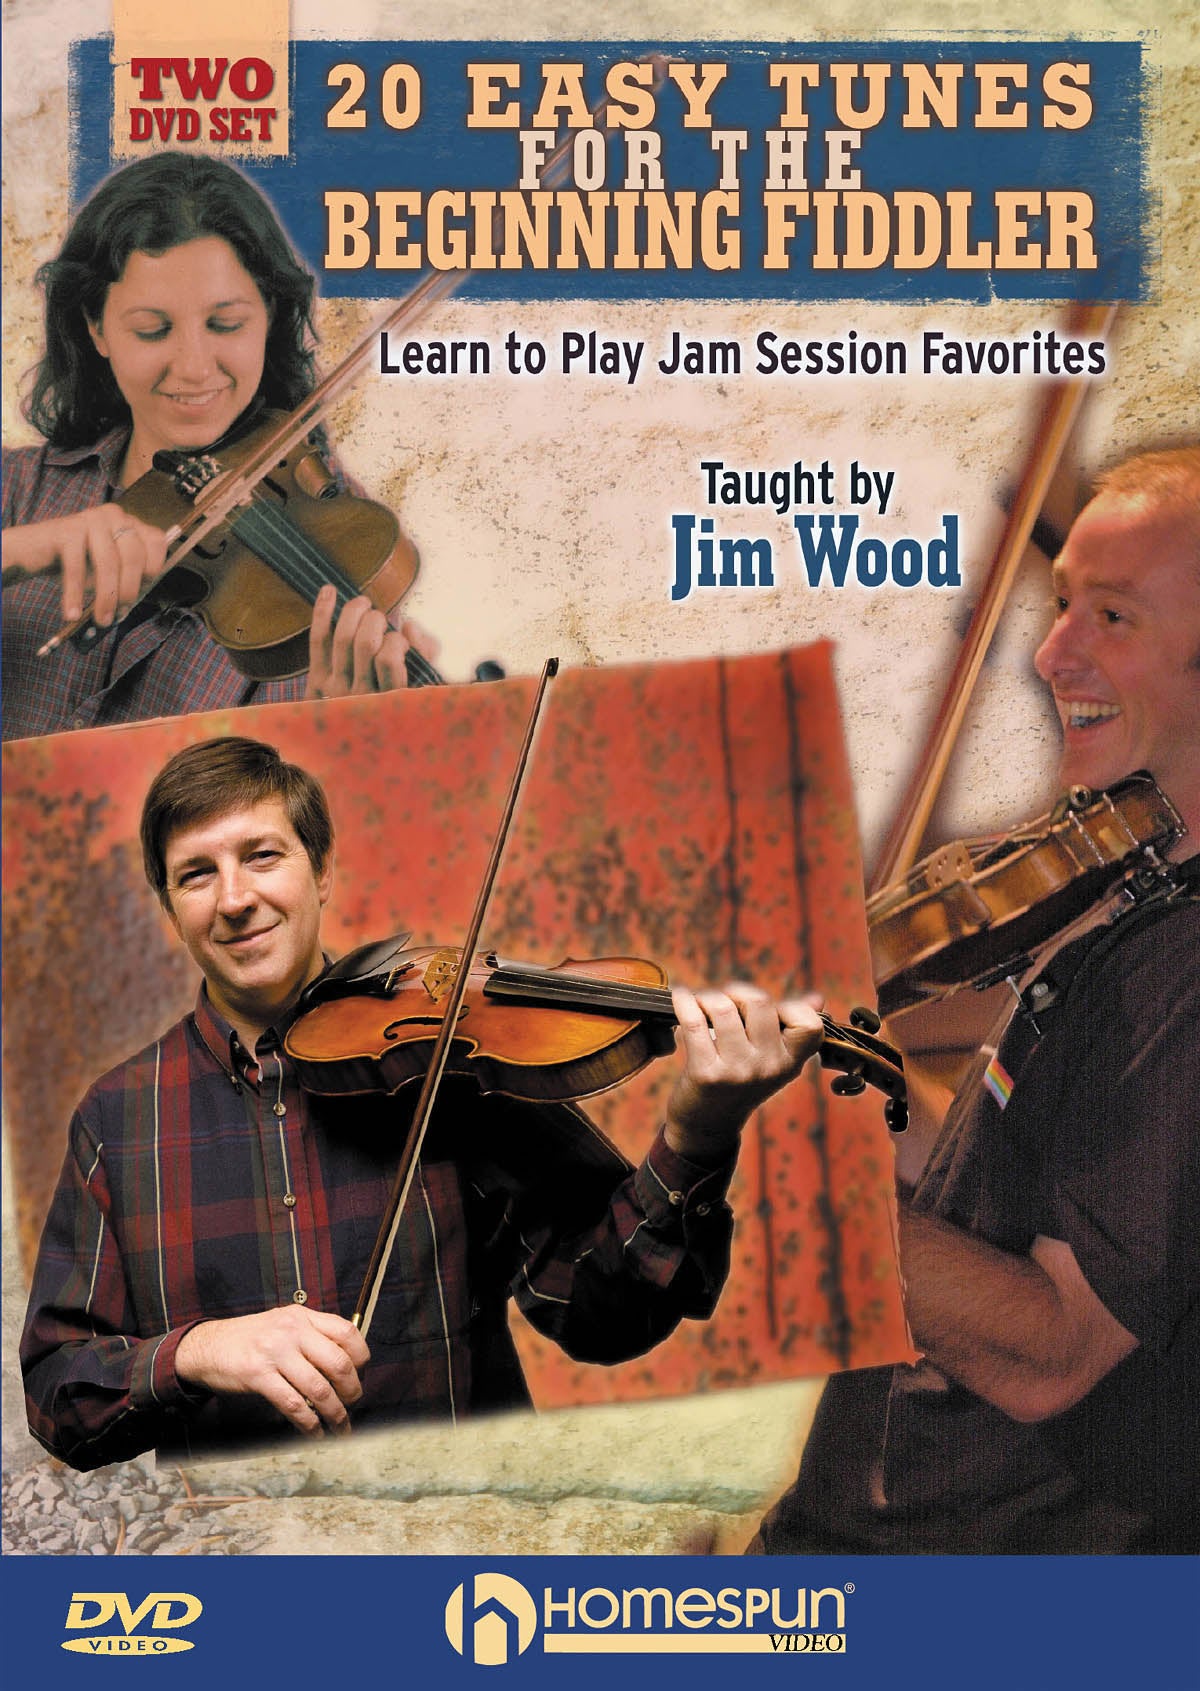 Image 1 of DOWNLOAD ONLY - 20 Easy Tunes for the Beginning Fiddler - Learn to Play Jam Session Favorites - SKU# 300-DVD370 : Product Type Media : Elderly Instruments